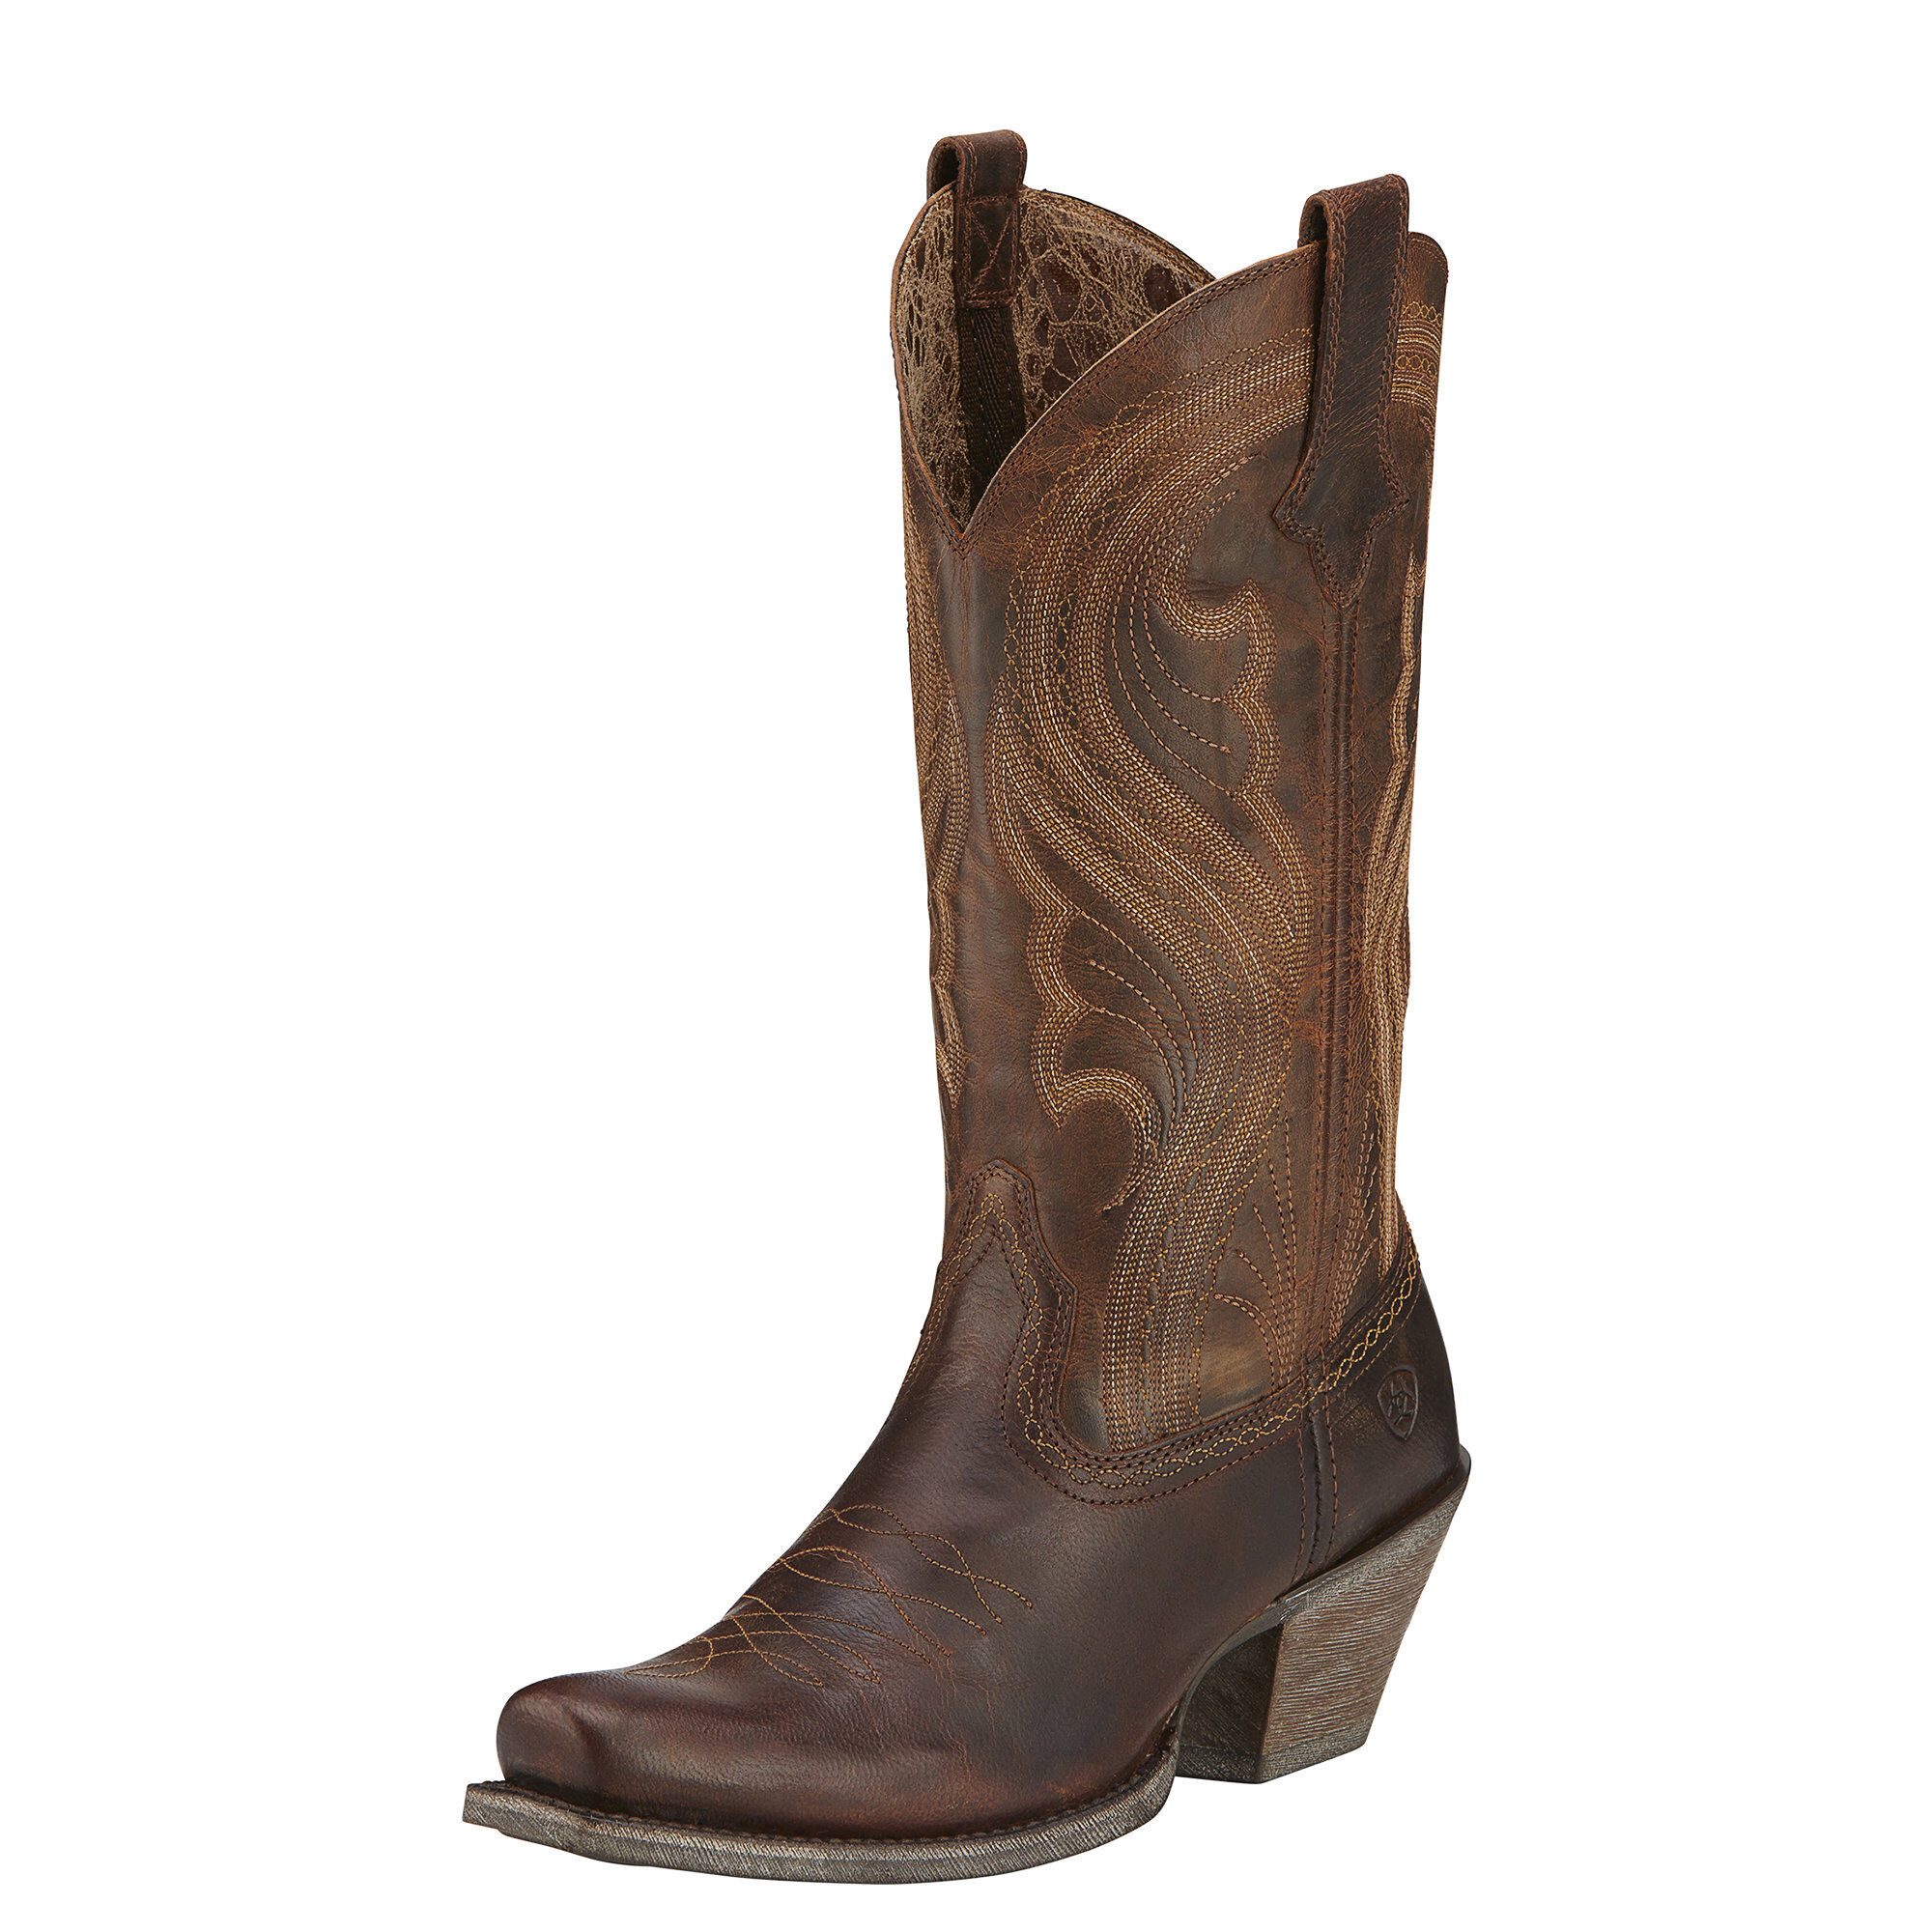 Women's Lively Western Boots in Sassy Brown Leather  by Ariat